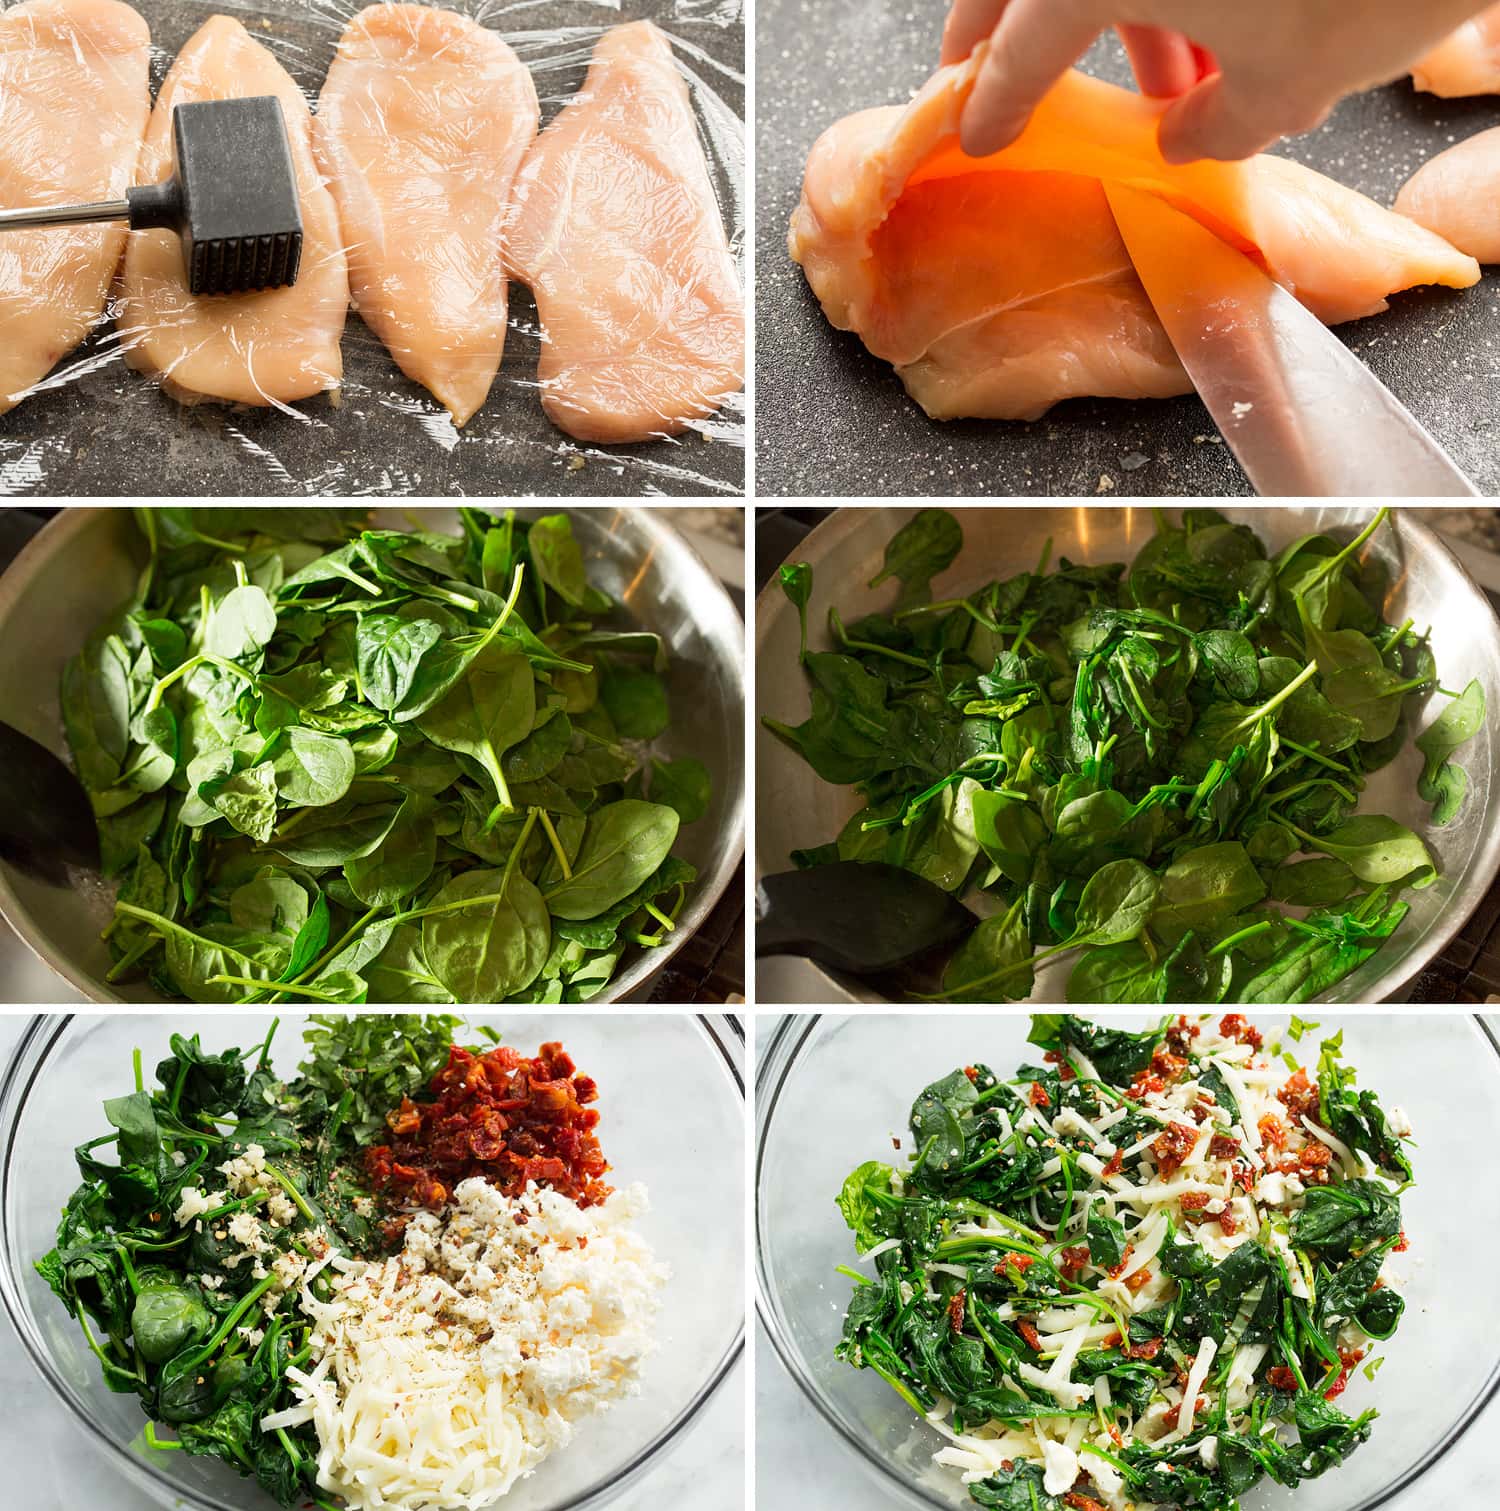 Steps showing how to prep chicken breasts and make spinach cheese filling.